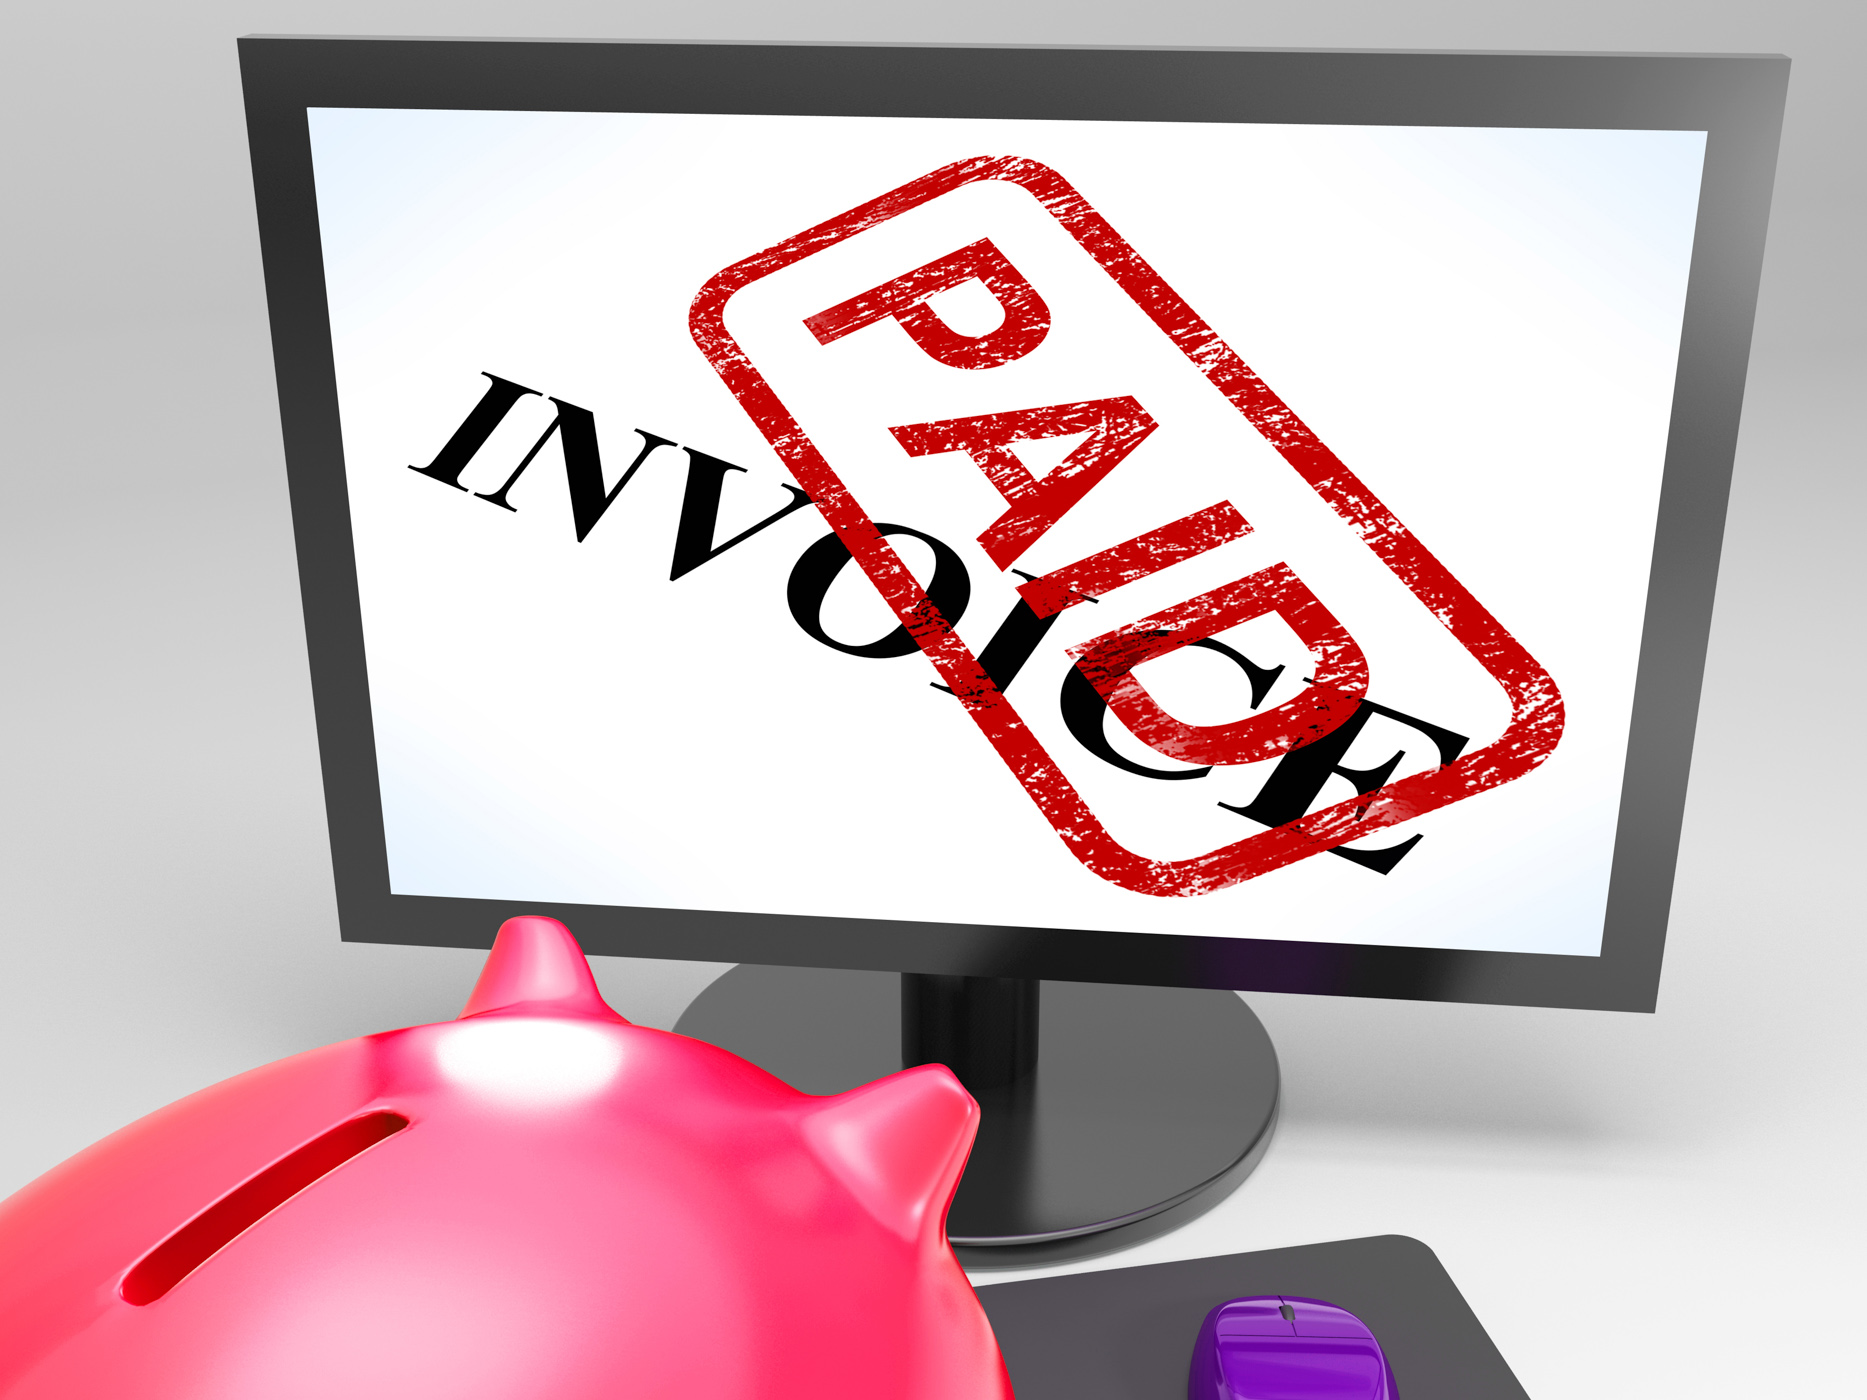 Invoice Paid Stamp Shows Payment Of Bills, Balance, Pay, Settlement, Selling, HQ Photo